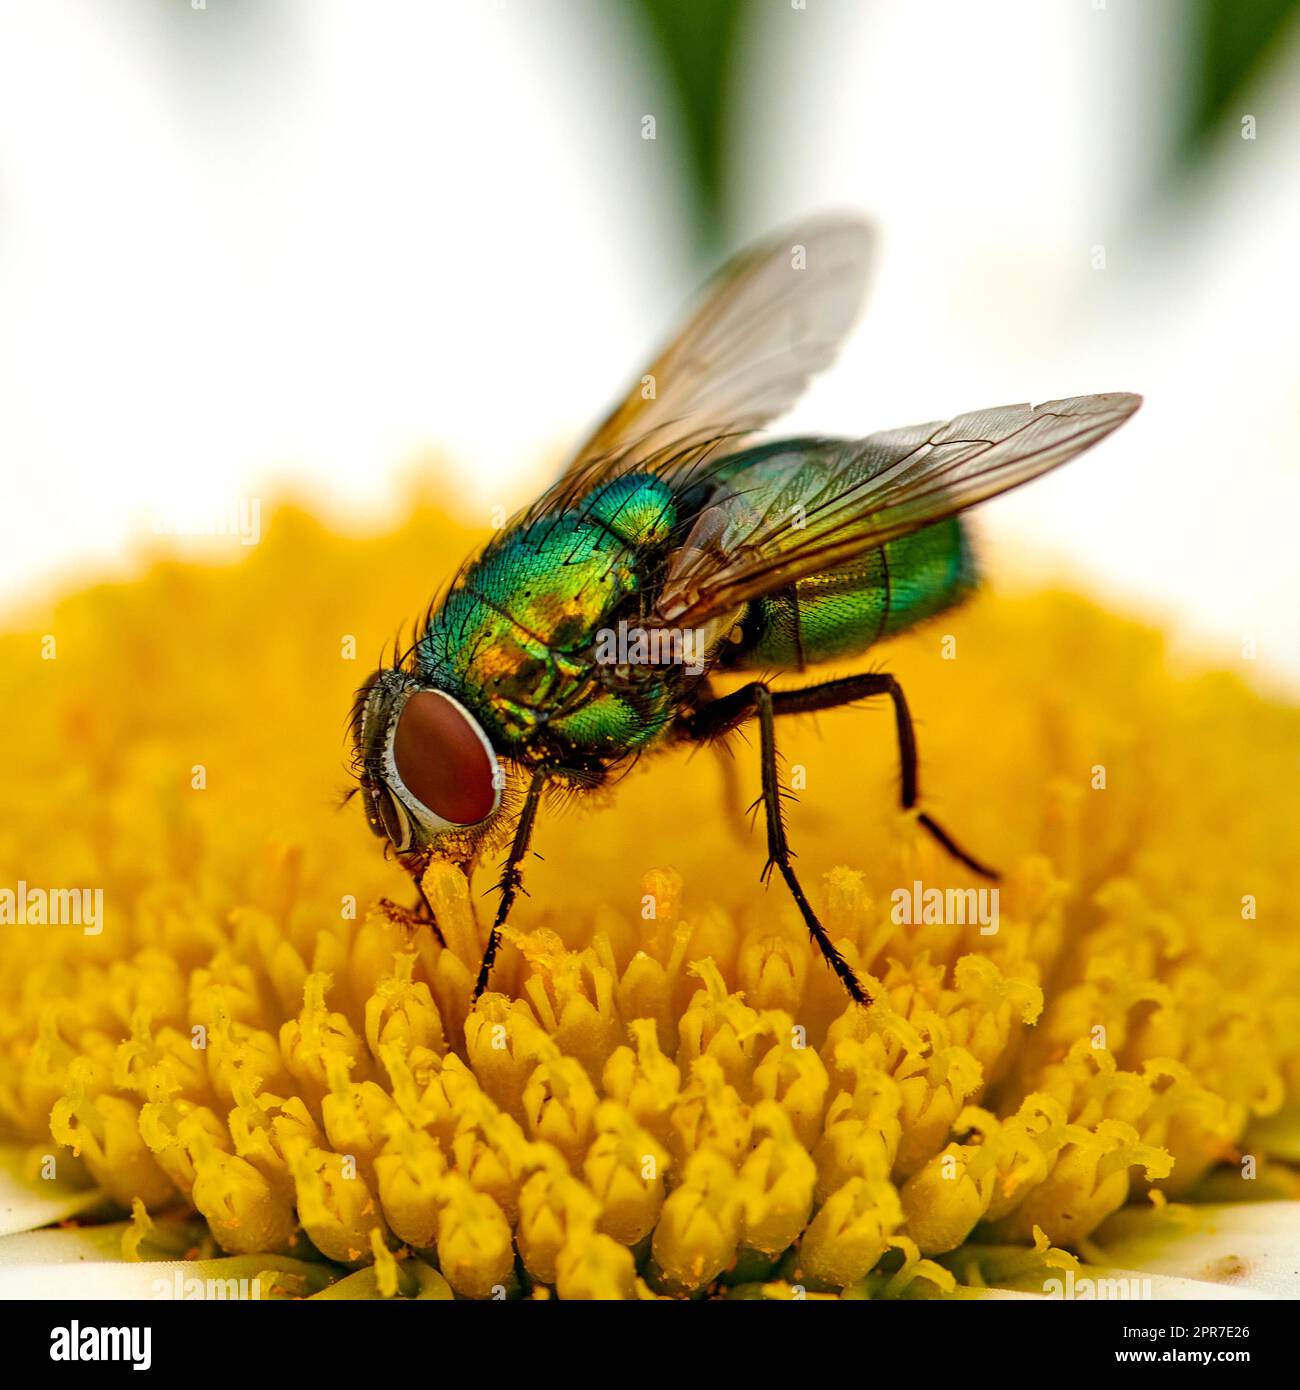 Macro of a common green bottle fly eating floral disc nectar on white Marguerite daisy flower. Closeup texture or detail of insect pollination, plant pest control in a secluded home garden or park Stock Photo